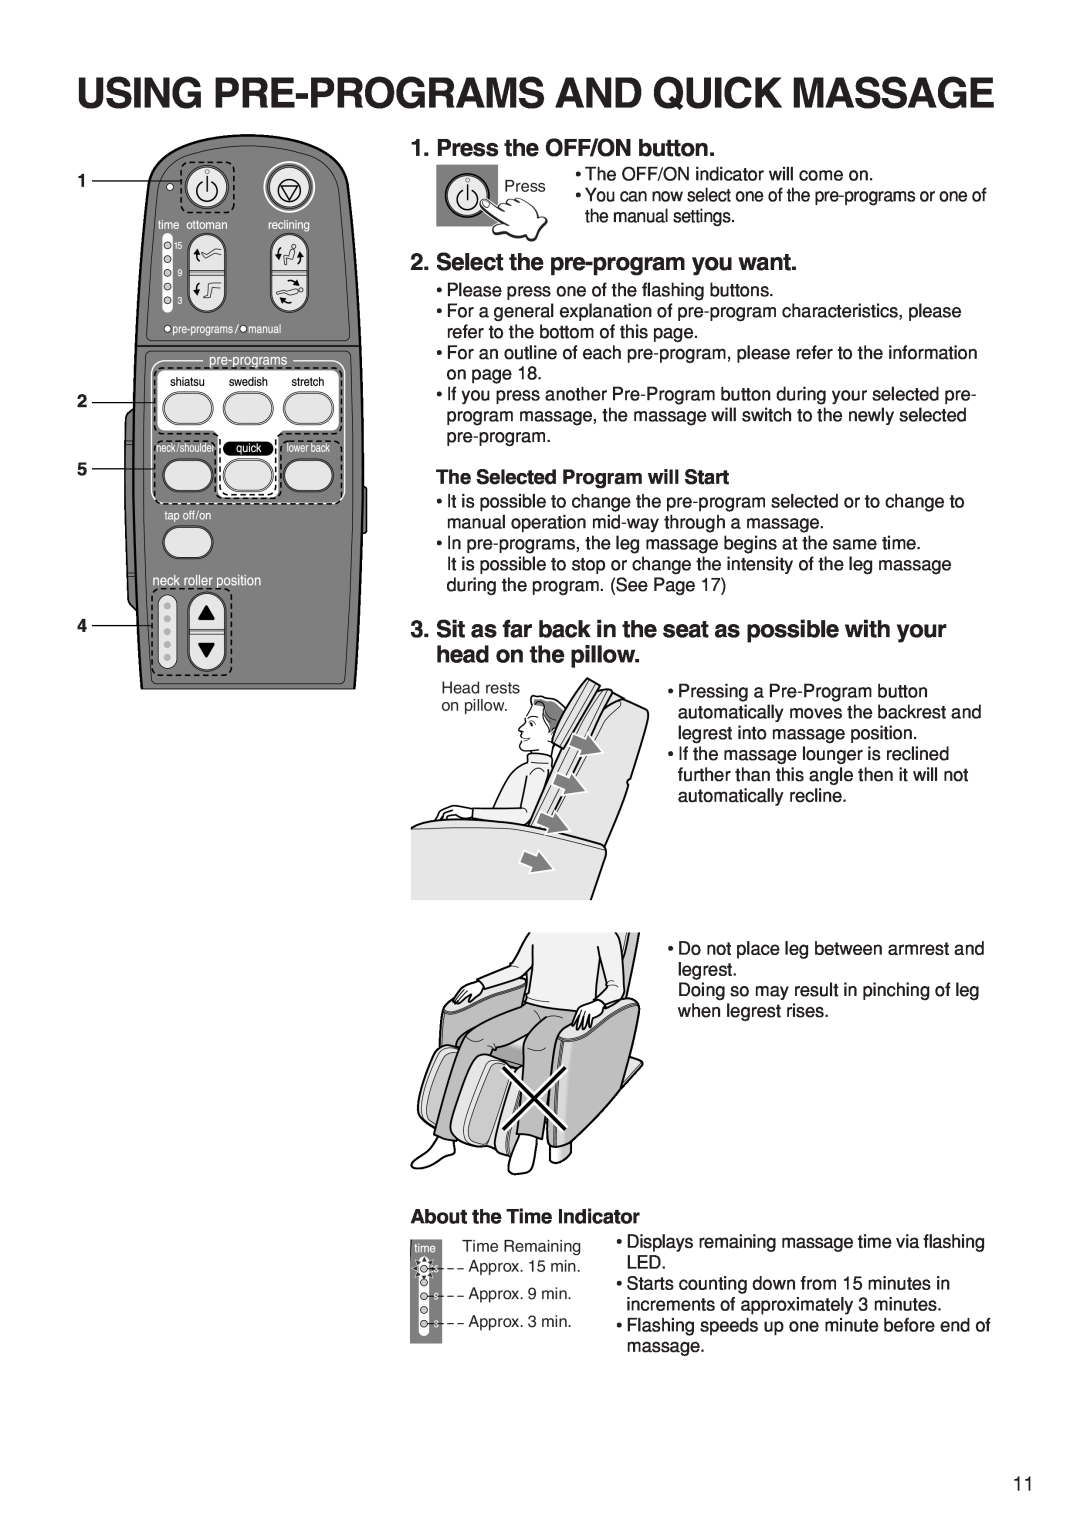 Panasonic EP1273 Using Pre-Programsand Quick Massage, Press the OFF/ON button, Select the pre-programyou want, 1 2 